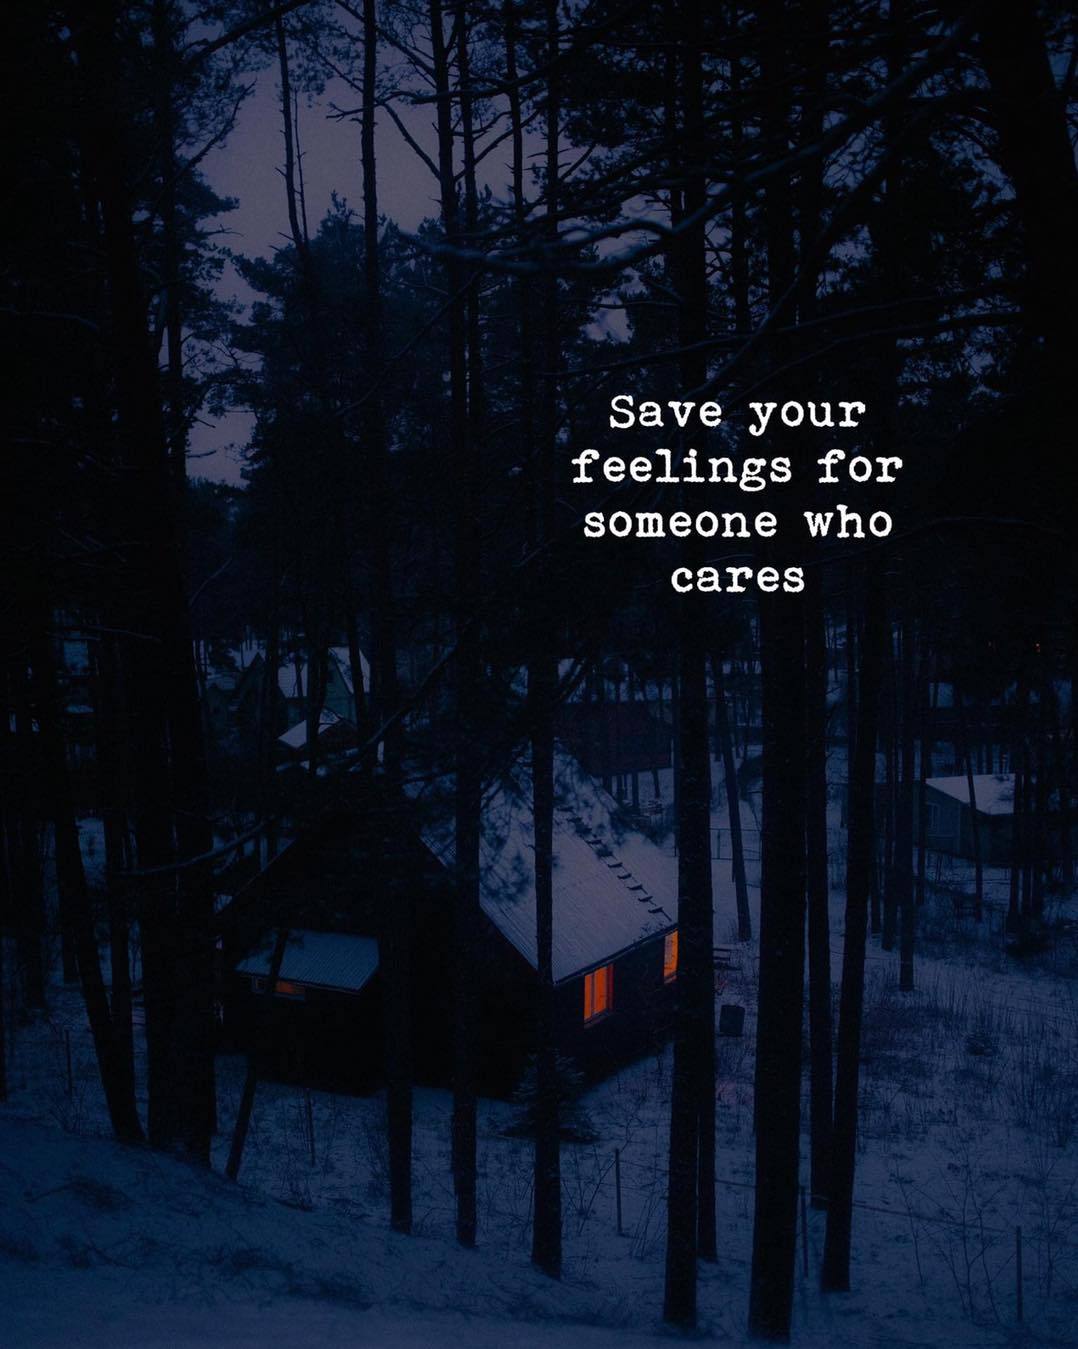 Quotes 'Nd Notes - Save Your Feelings For Someone Who Cares.